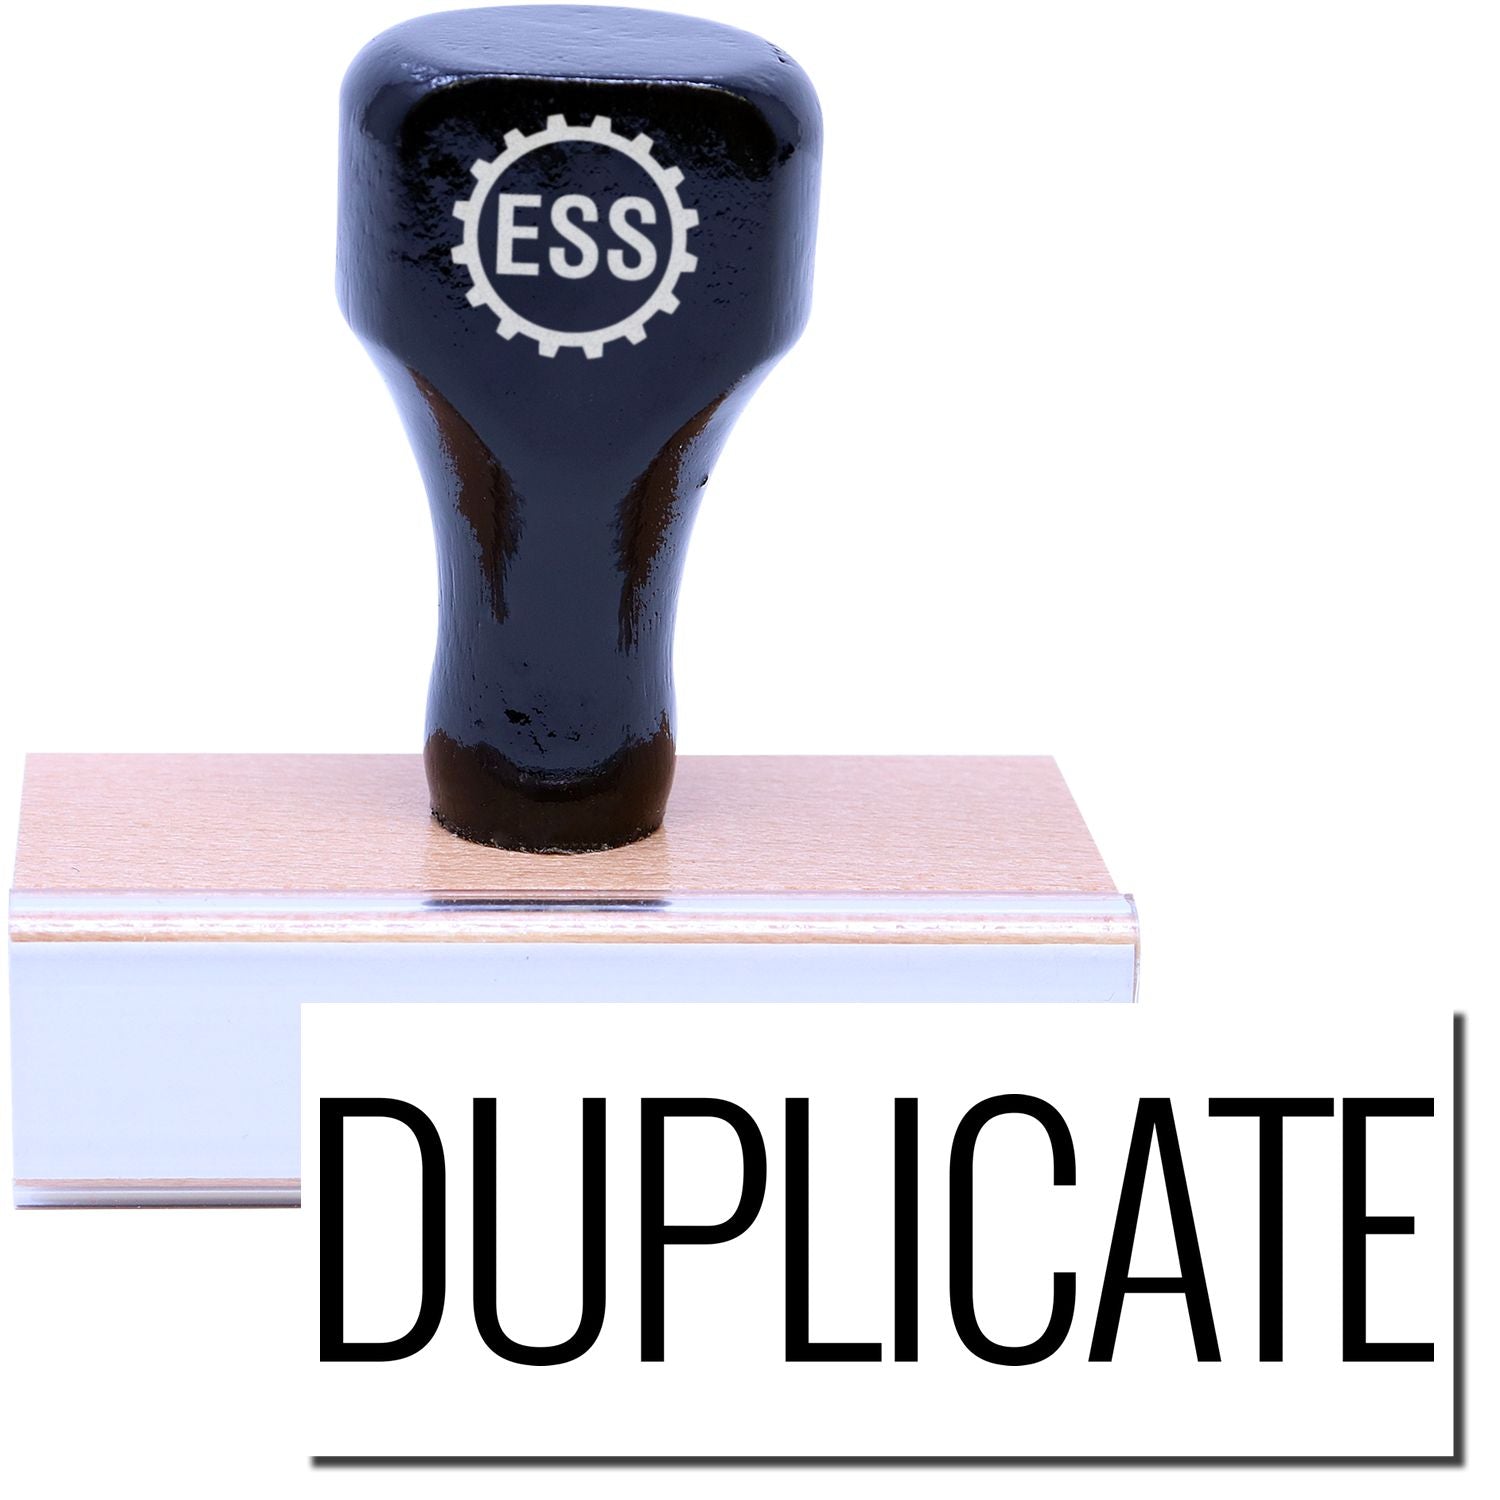 A stock office rubber stamp with a stamped image showing how the text "DUPLICATE" in a large narrow font is displayed after stamping.